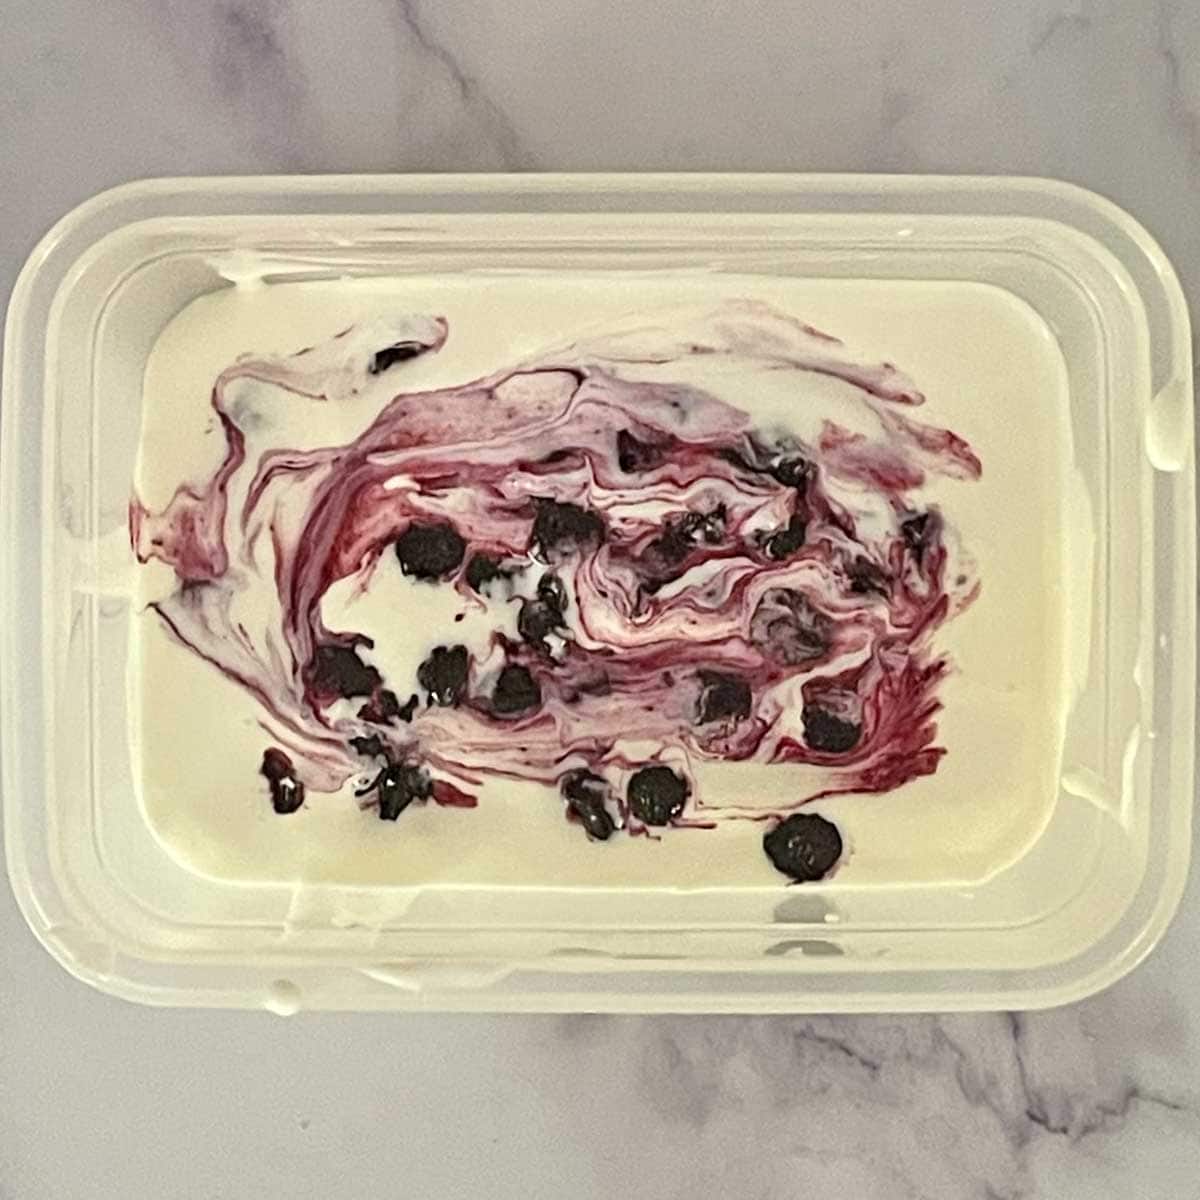 Layers of cream cheese and cooked blueberries.